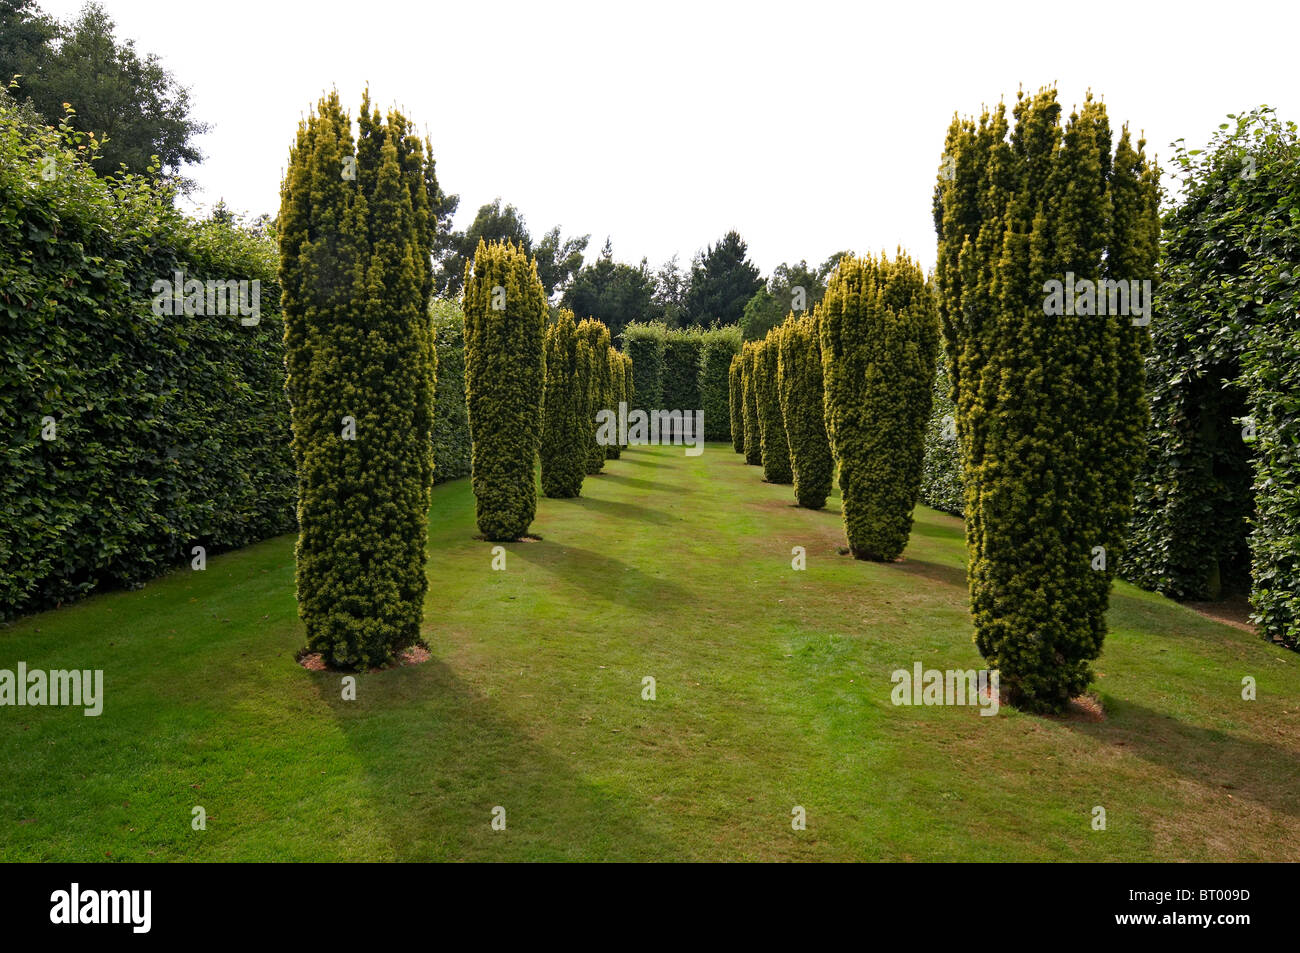 English country garden with avenue of clipped yew trees Stock Photo